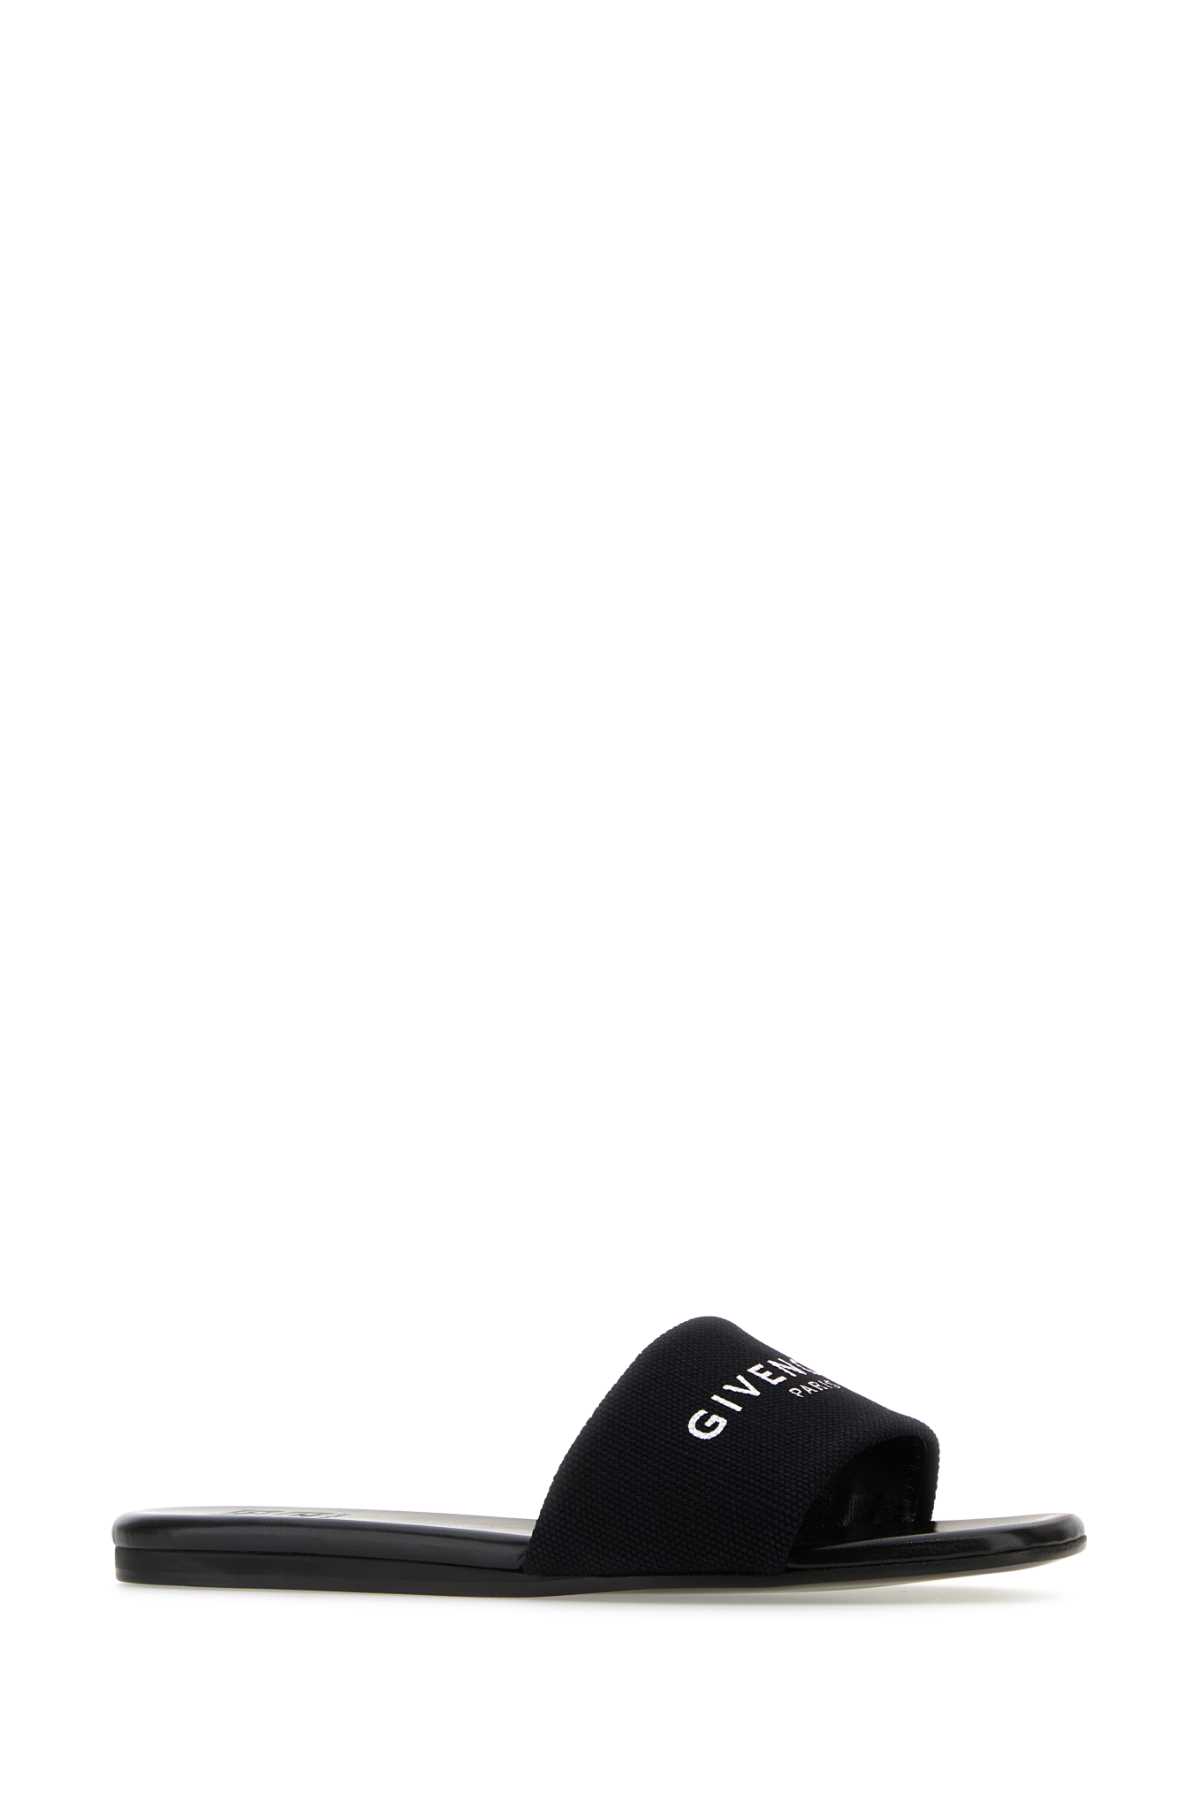 GIVENCHY BLACK CANVAS 4G SLIPPERS